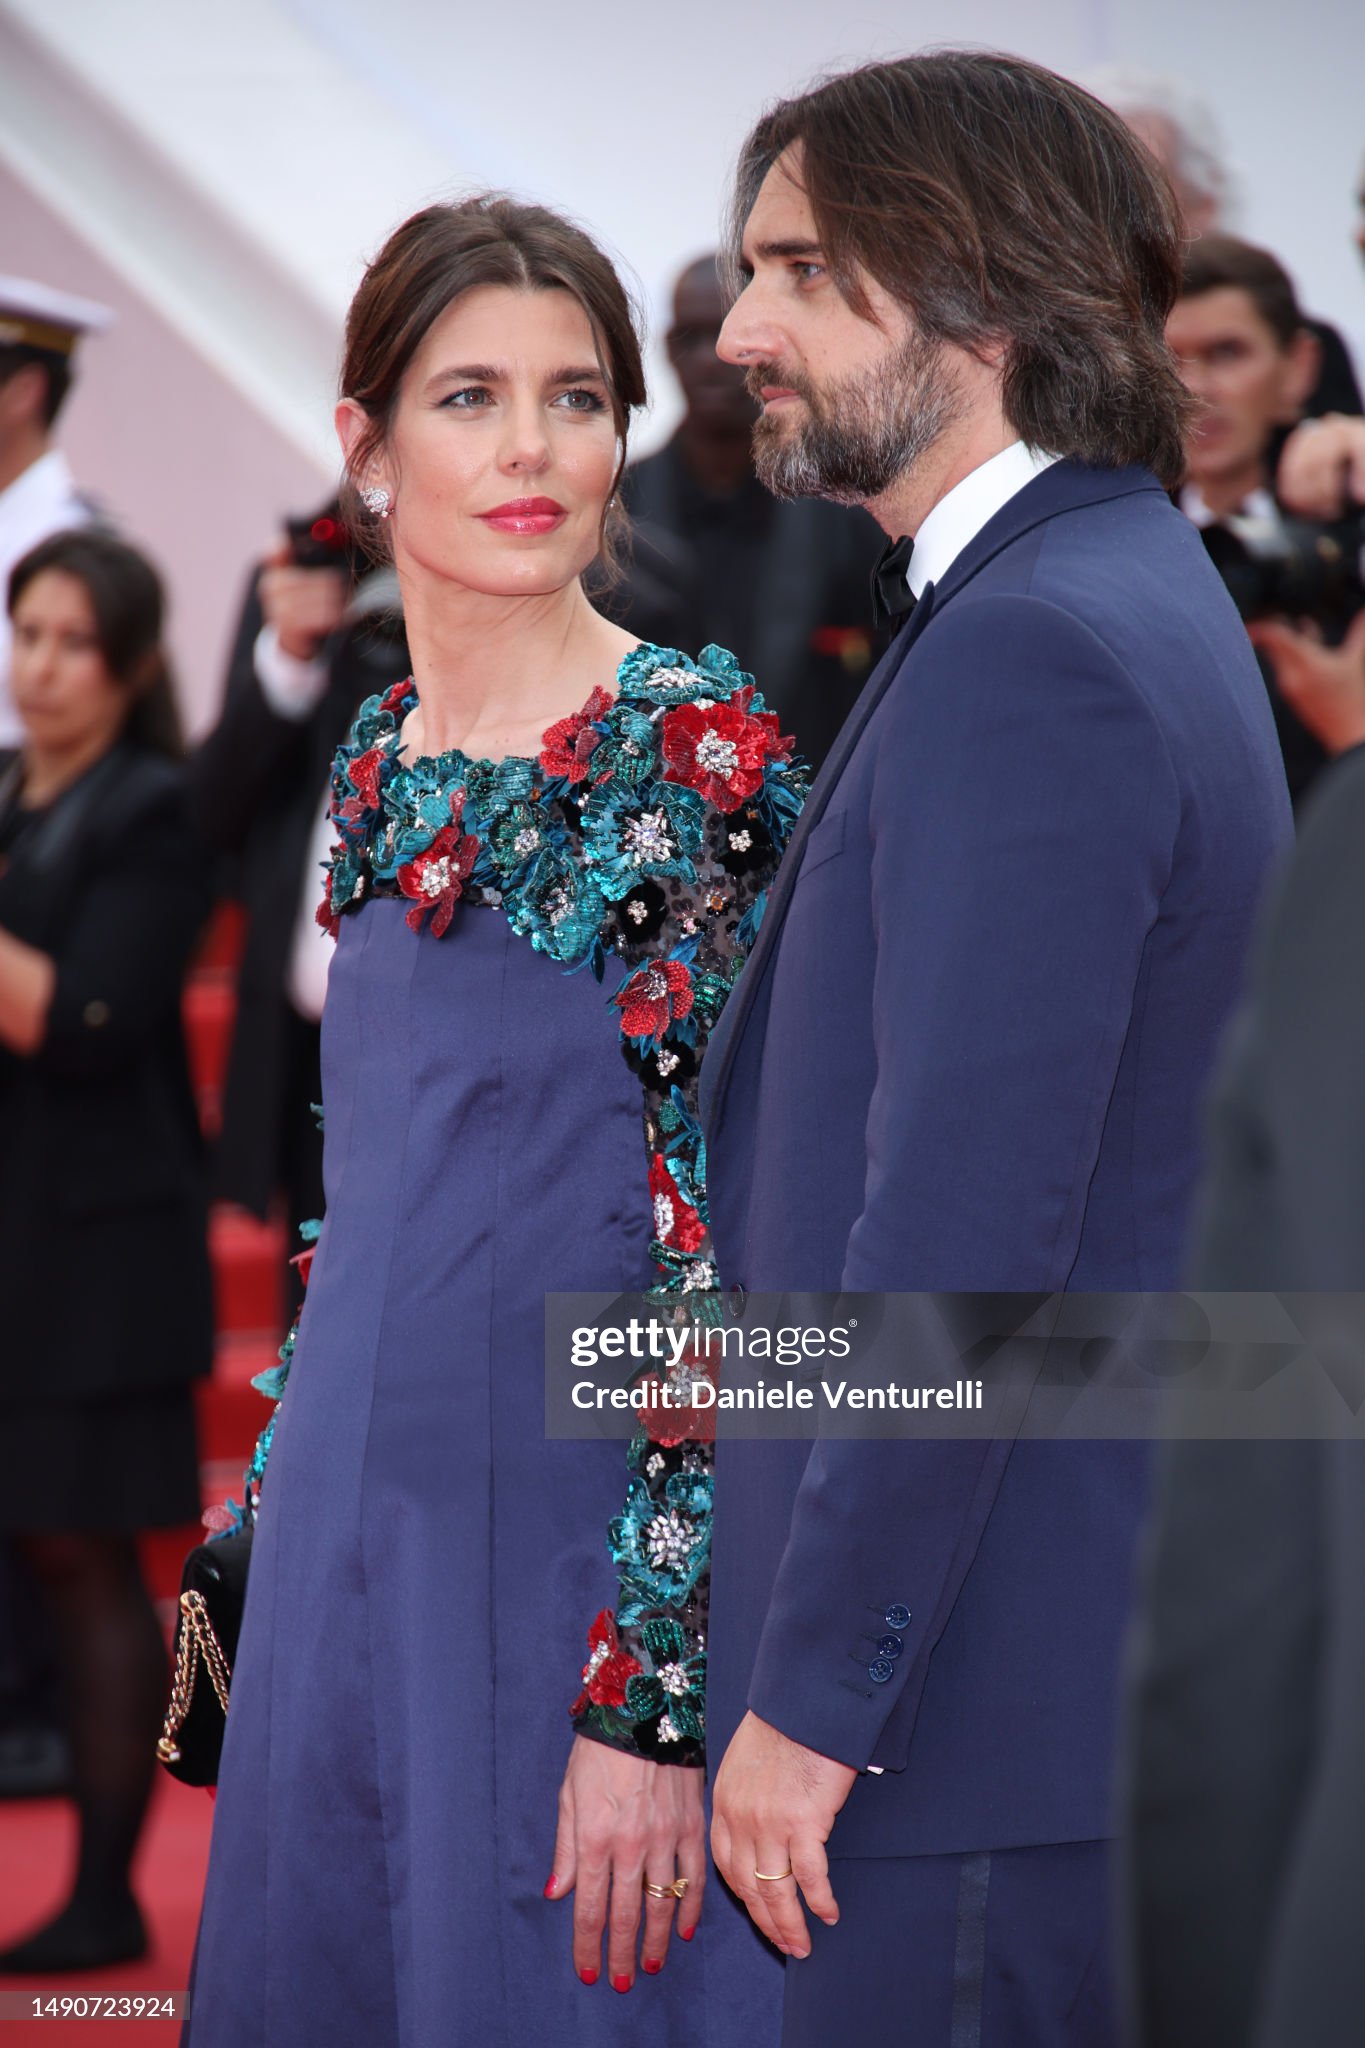 charlotte-casiraghi-and-dimitri-rassam-attend-the-jeanne-du-barry-screening-opening-ceremony.jpg